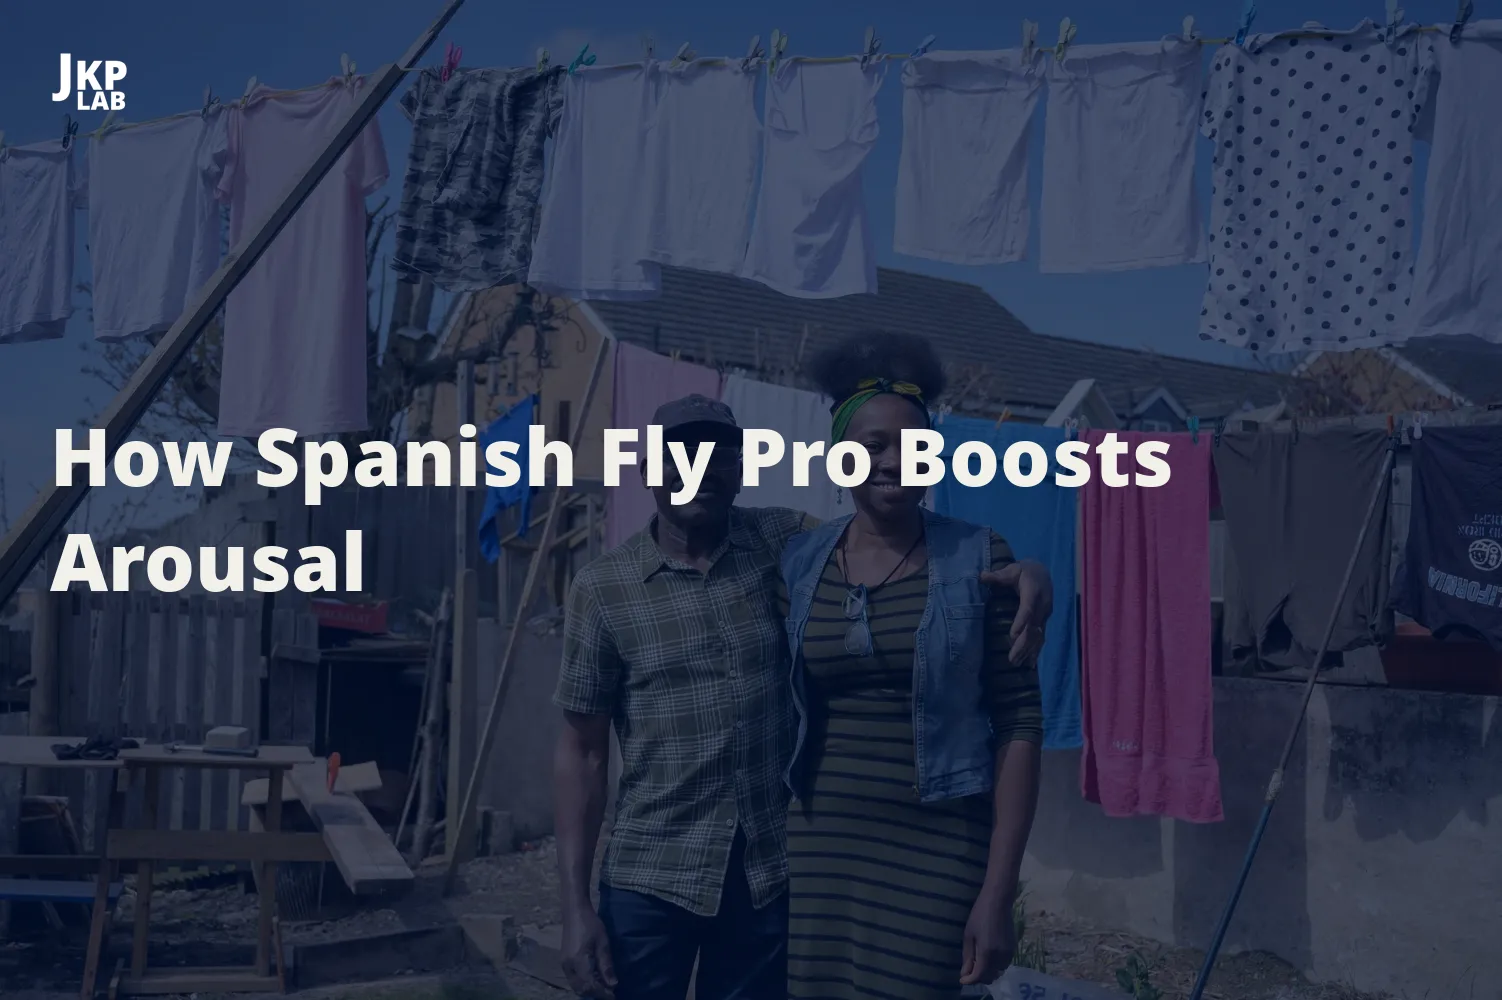 Ingredients of Spanish Fly Pro: A Complete List